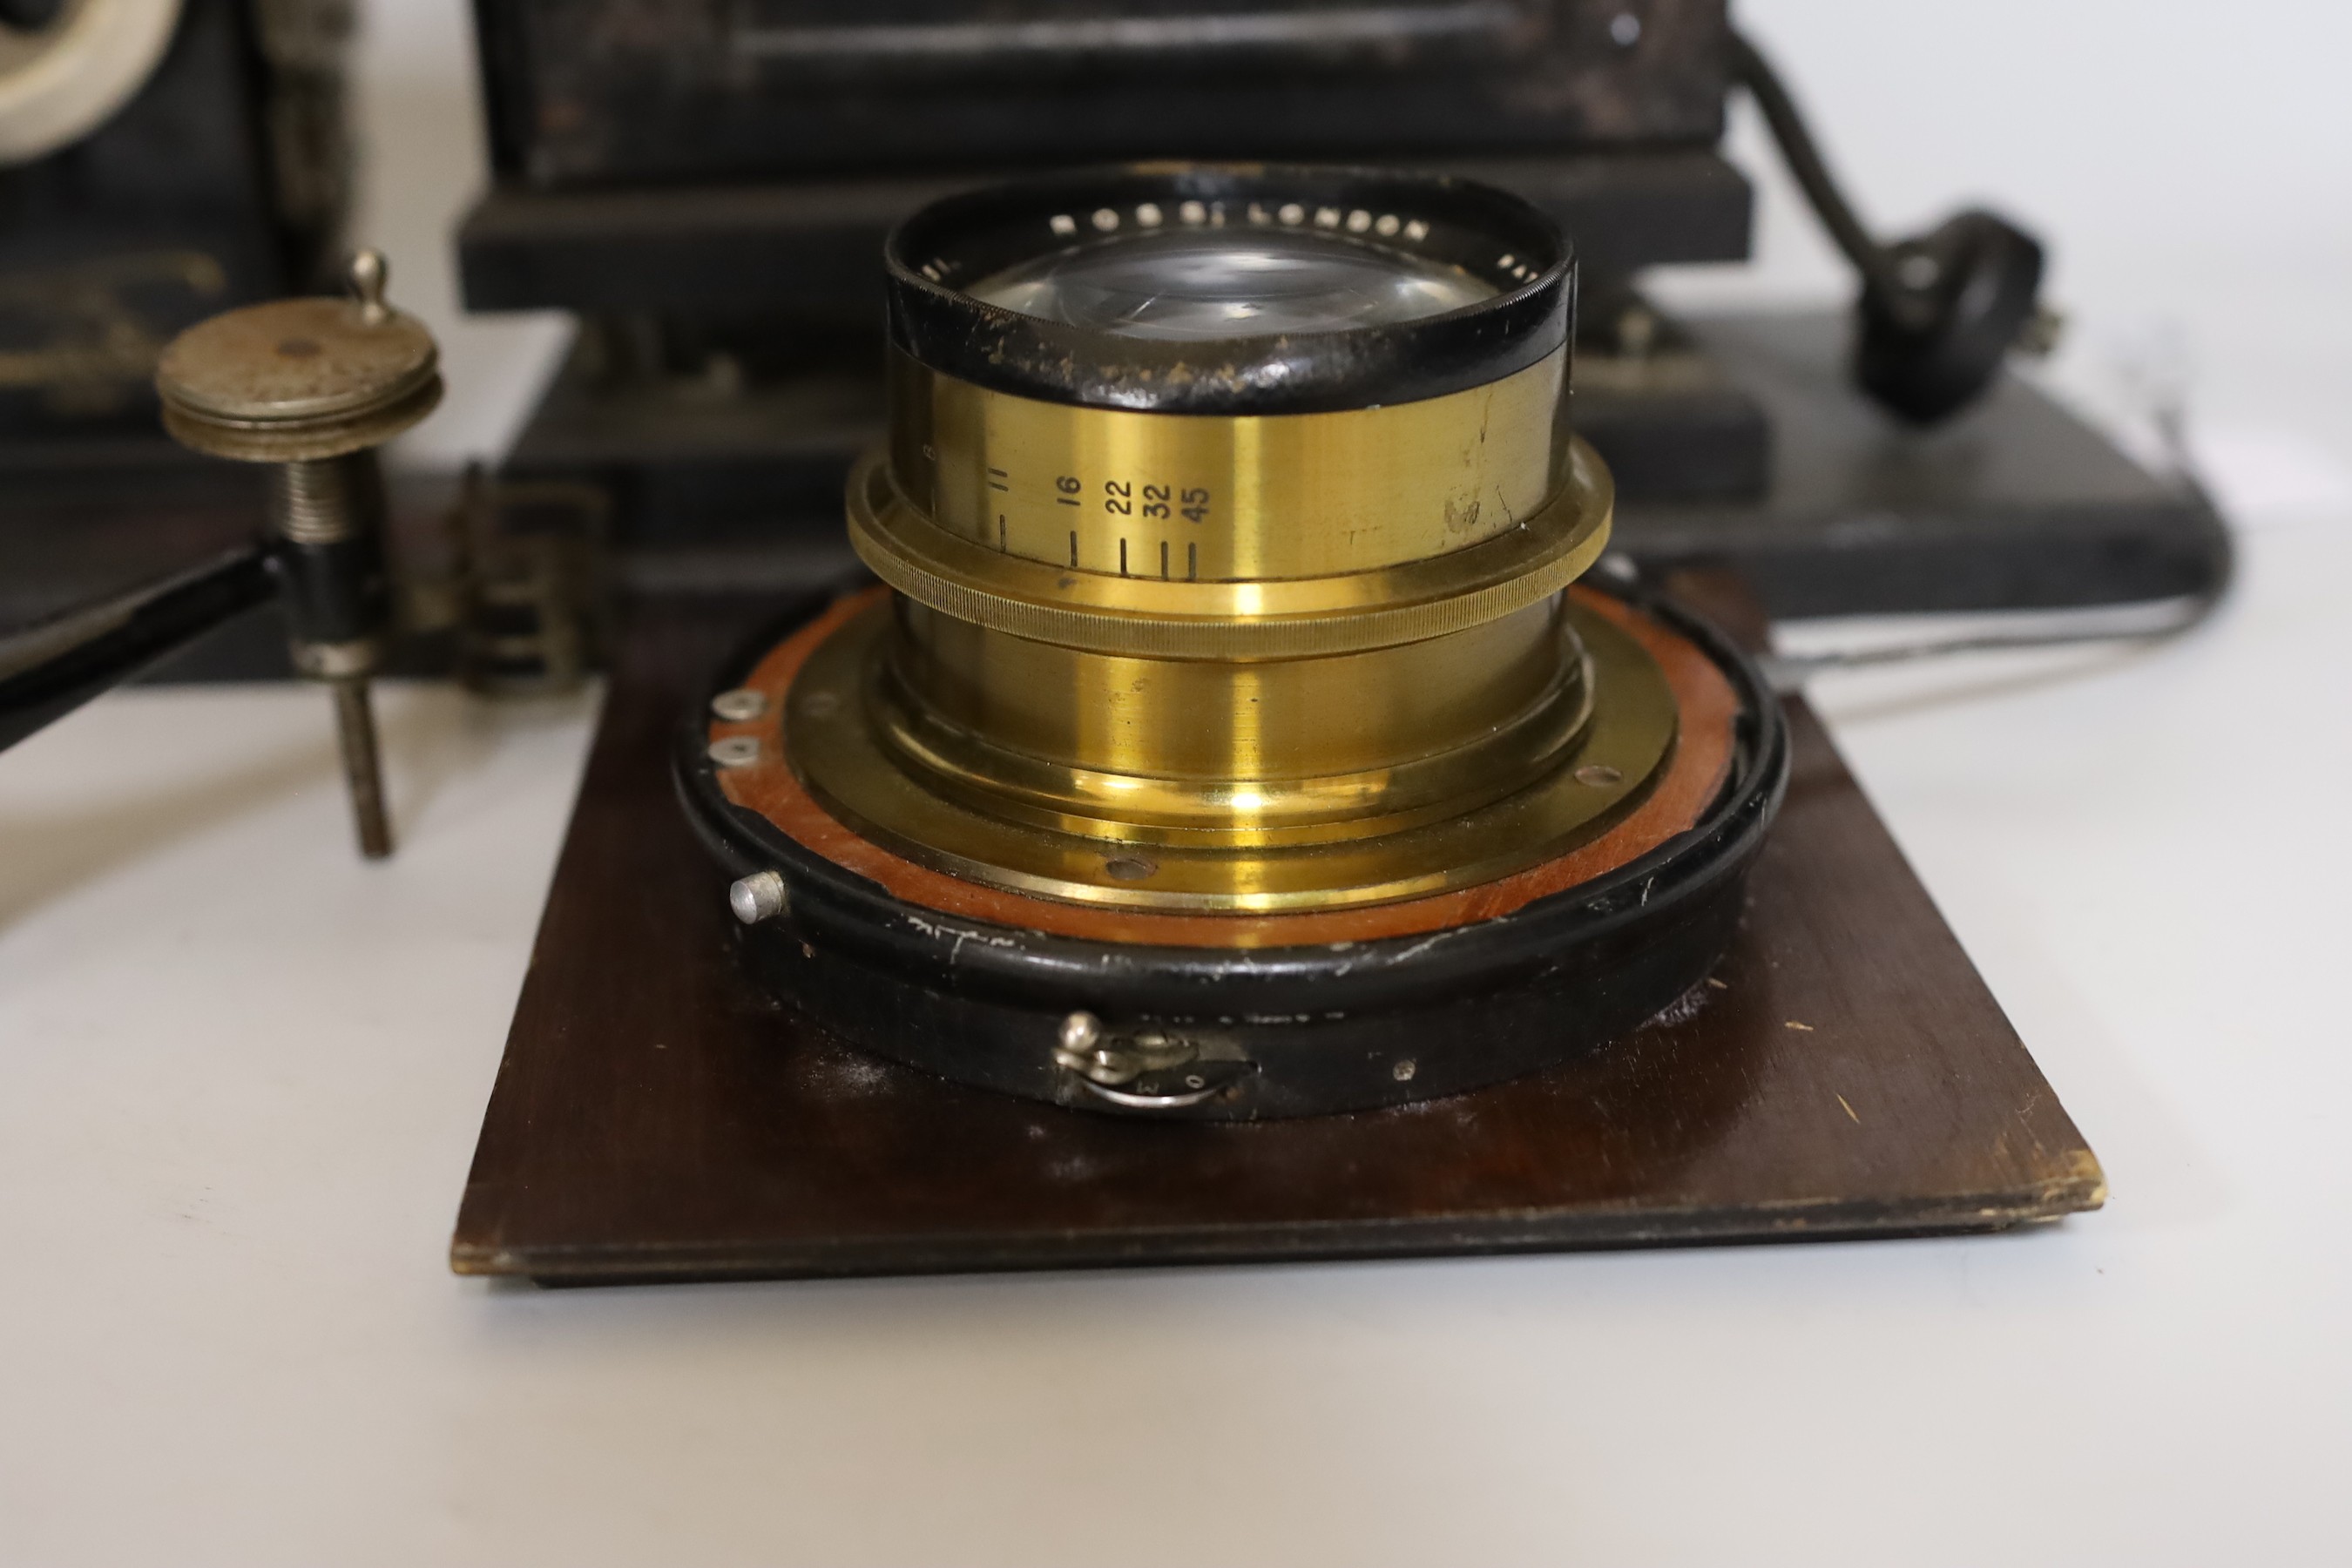 An Edison home kinetoscope, serial number 2364 and a Ross London Patent lens